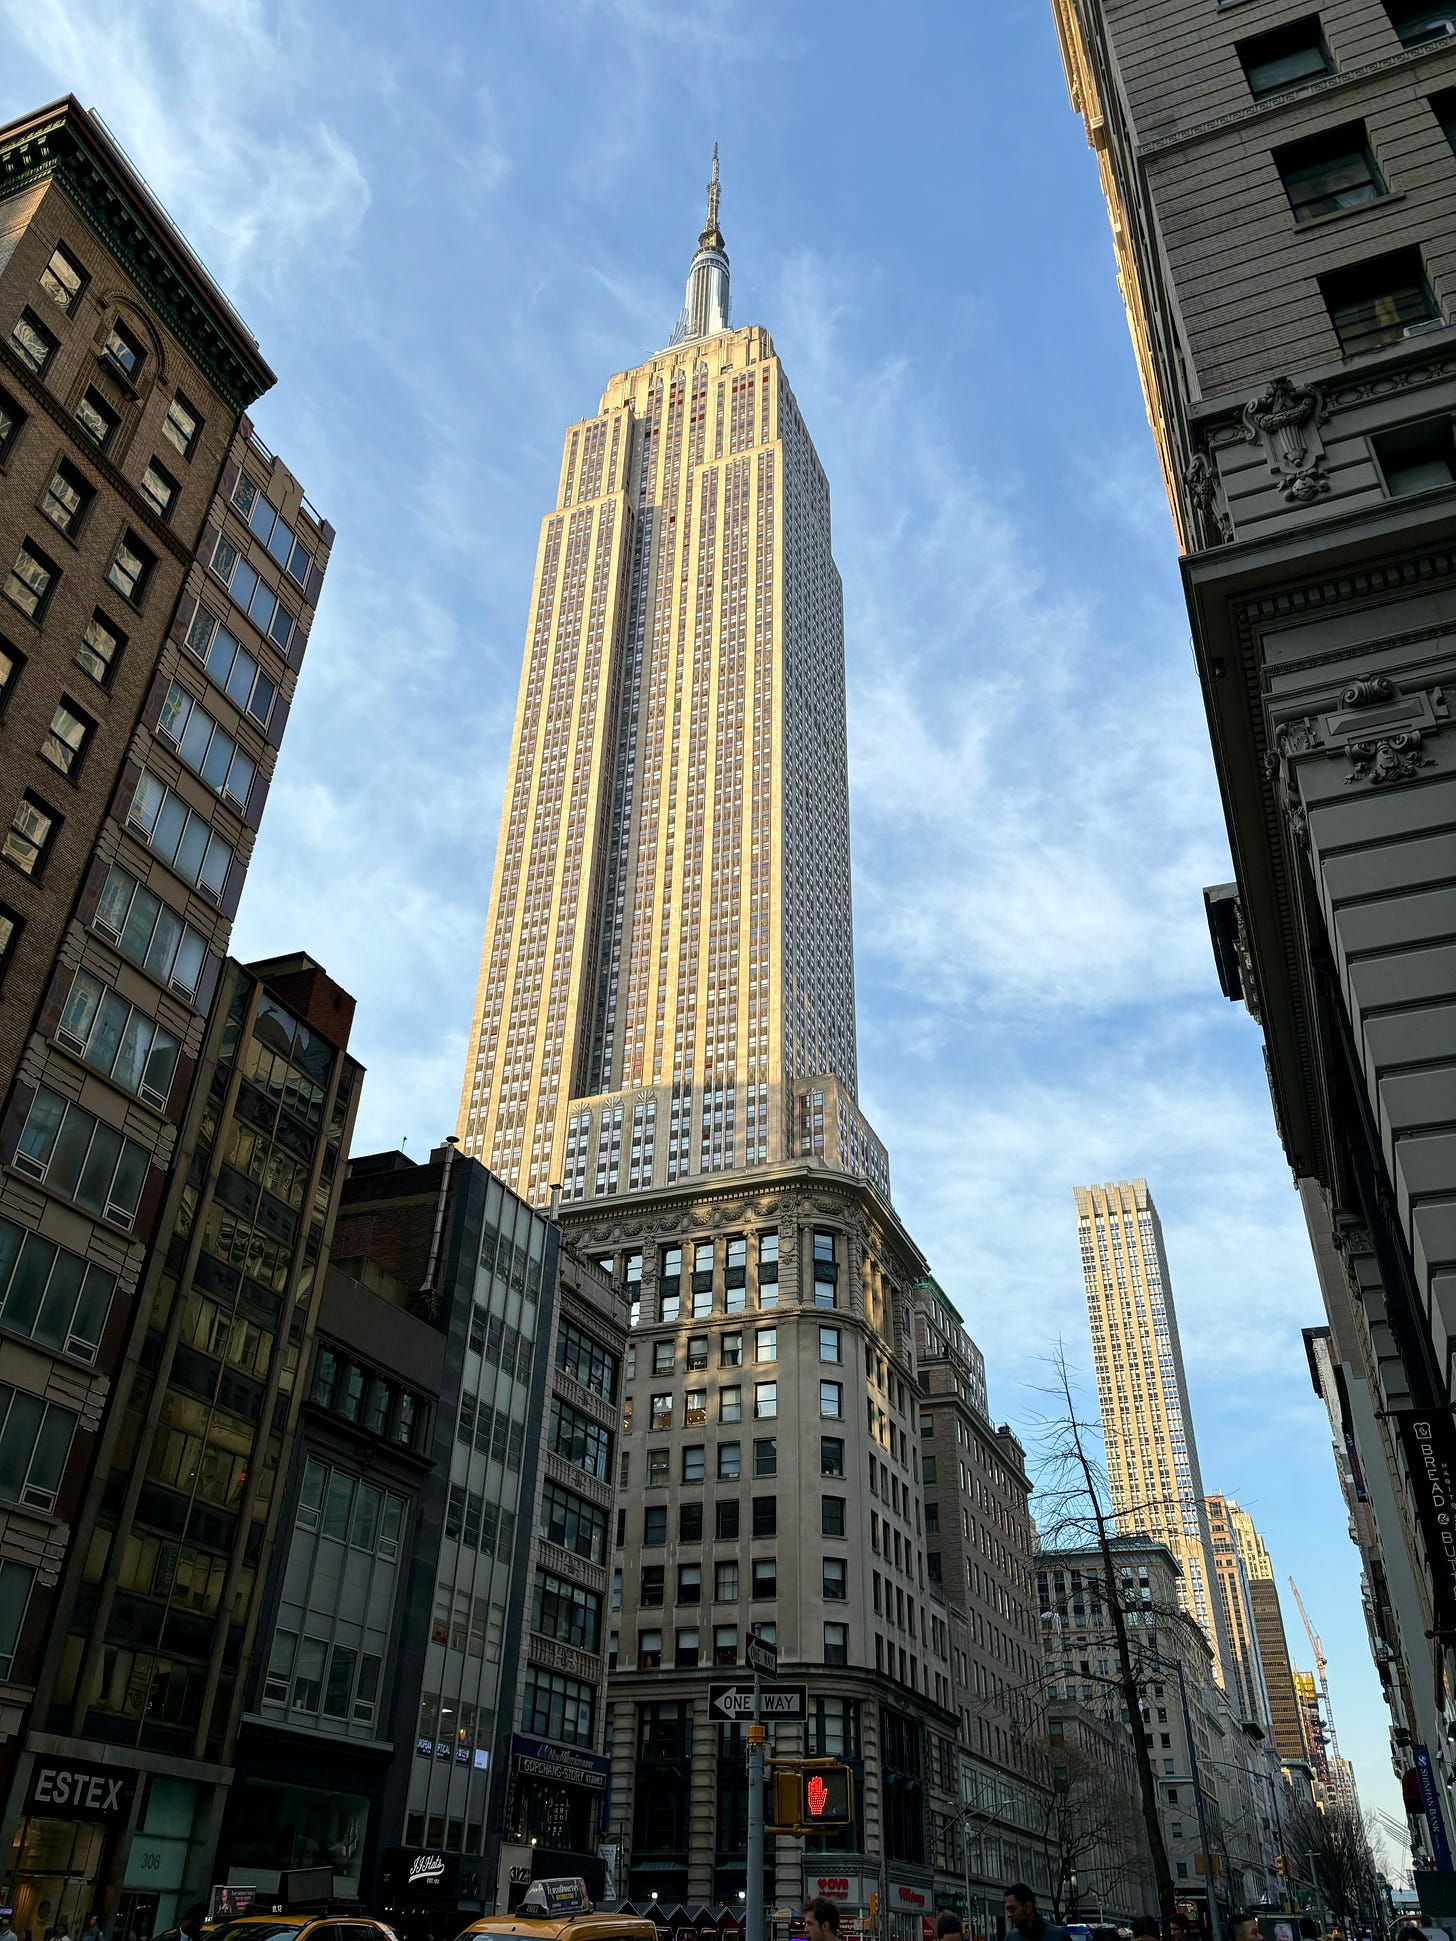 The Empire State Building aglow in the afternoon sun against a blue sky with only wisps of white clouds.